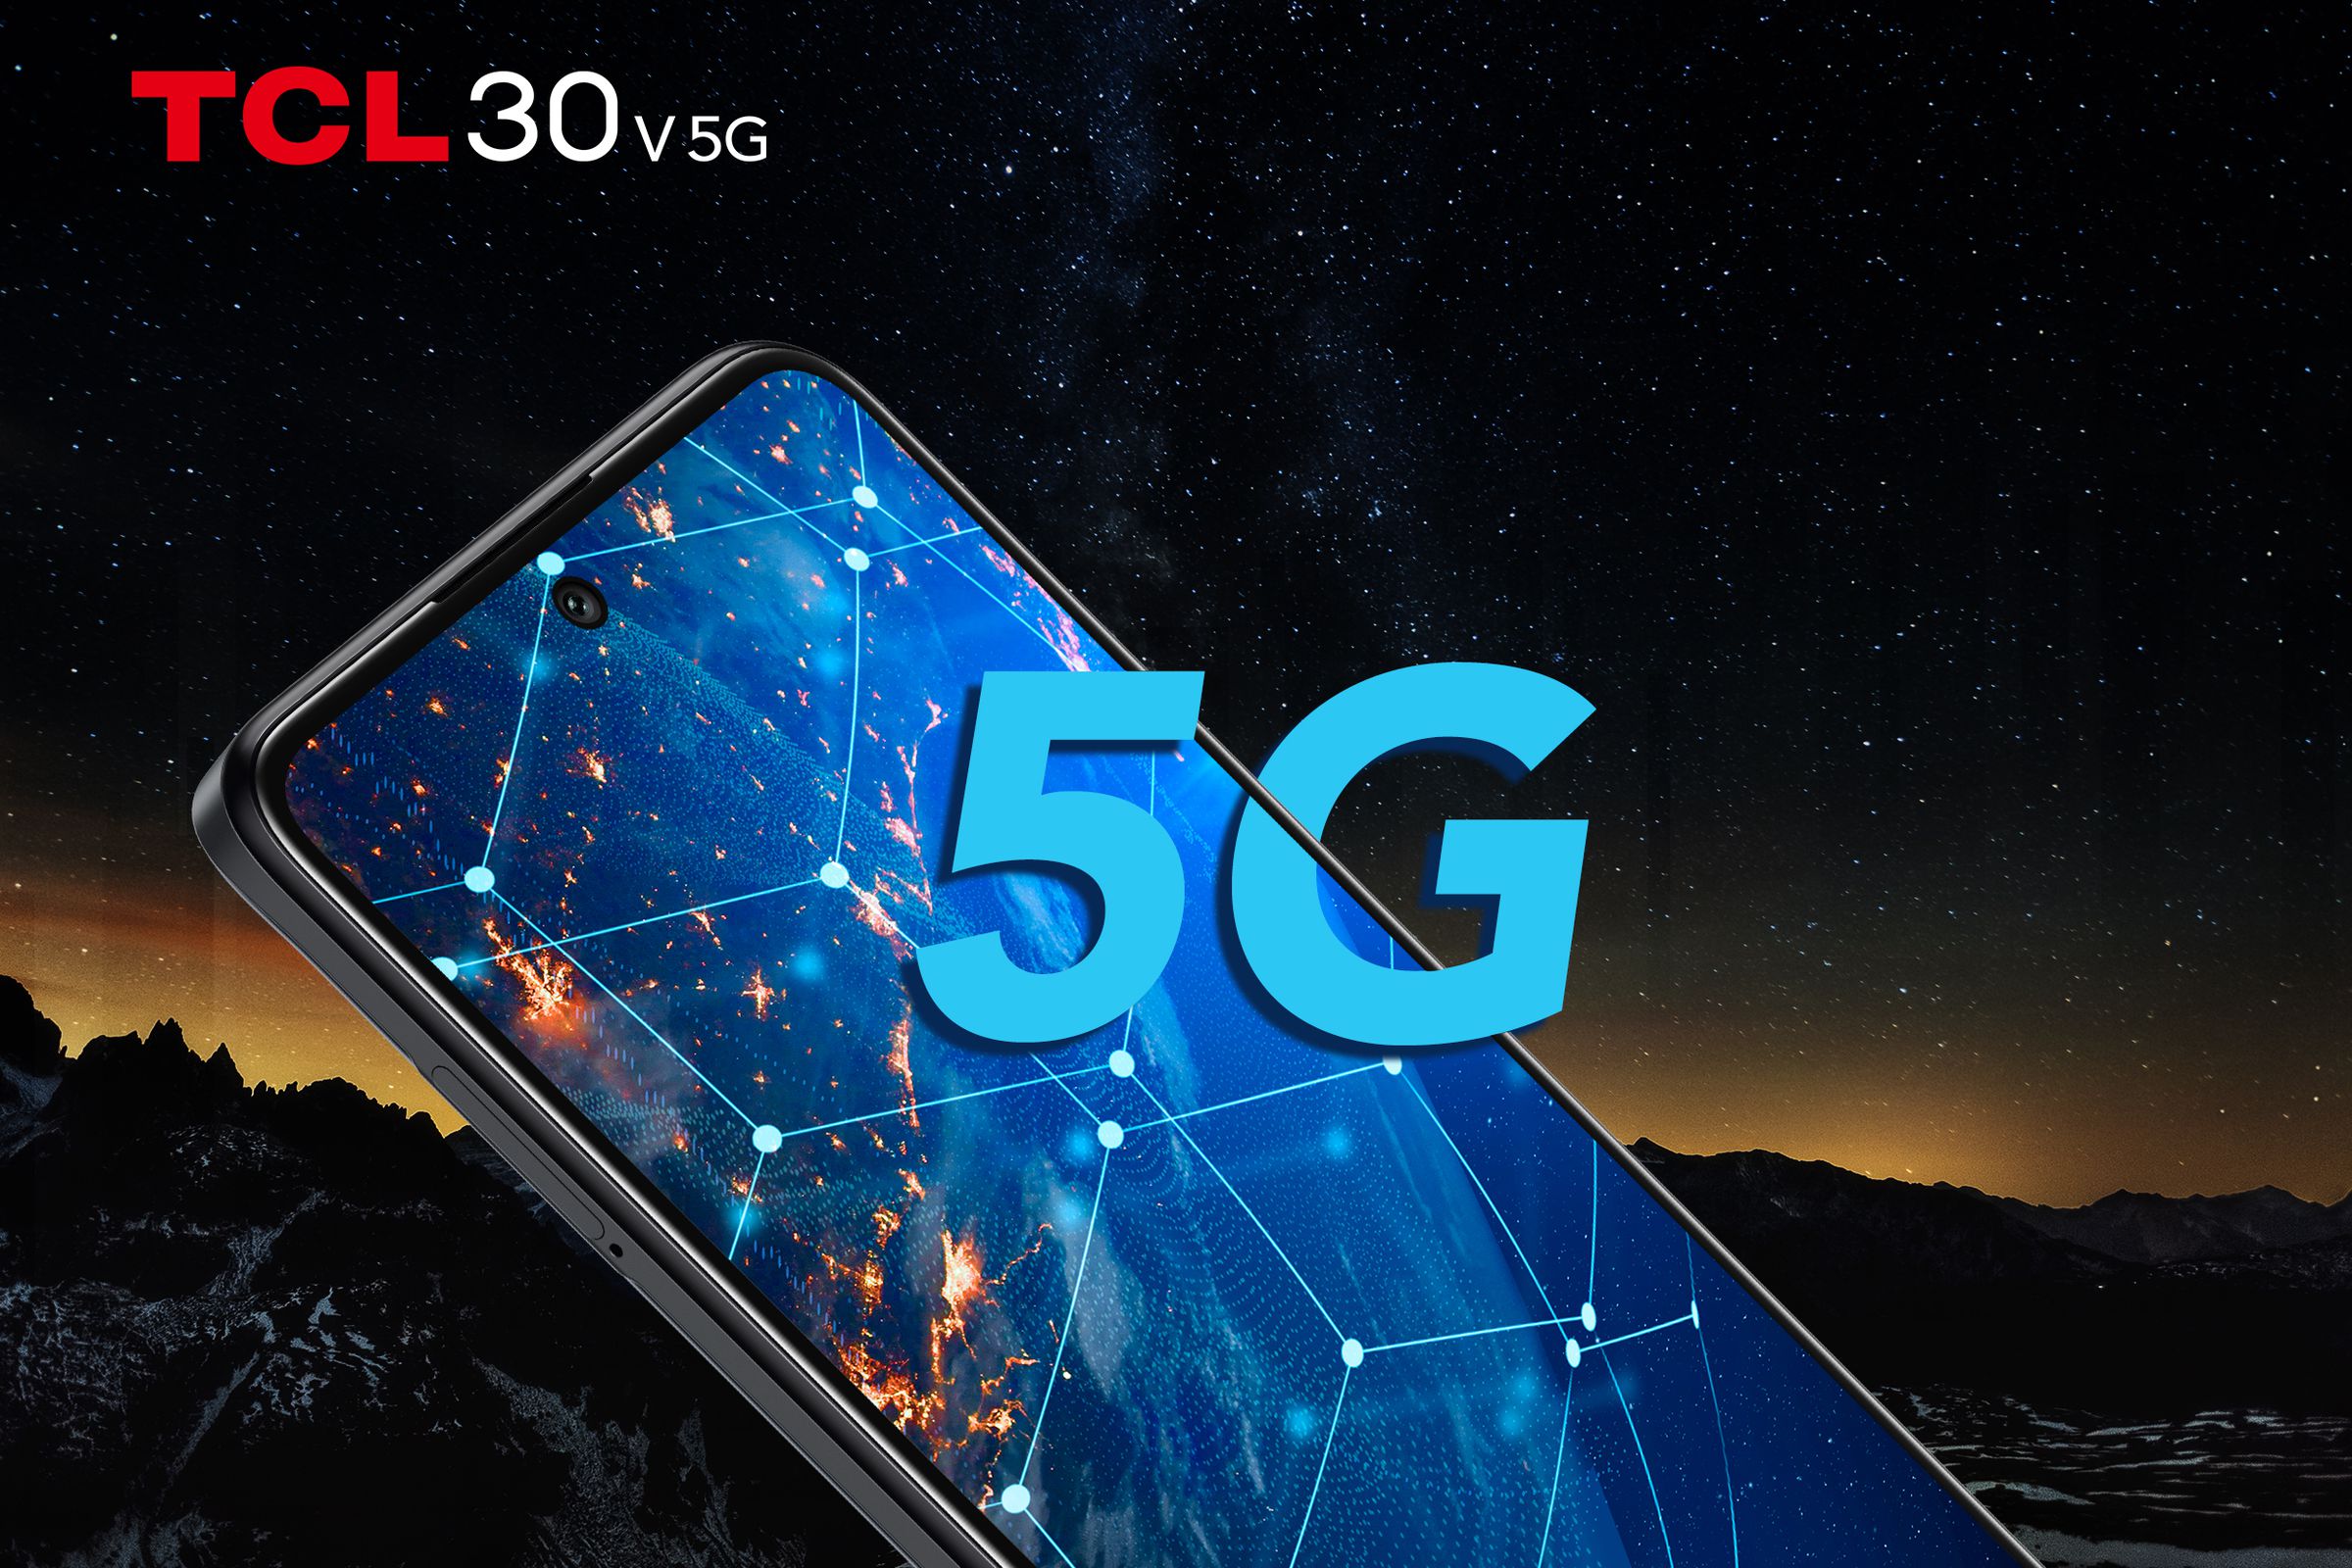 The 30 V 5G is ready for all varieties of Verizon 5G.